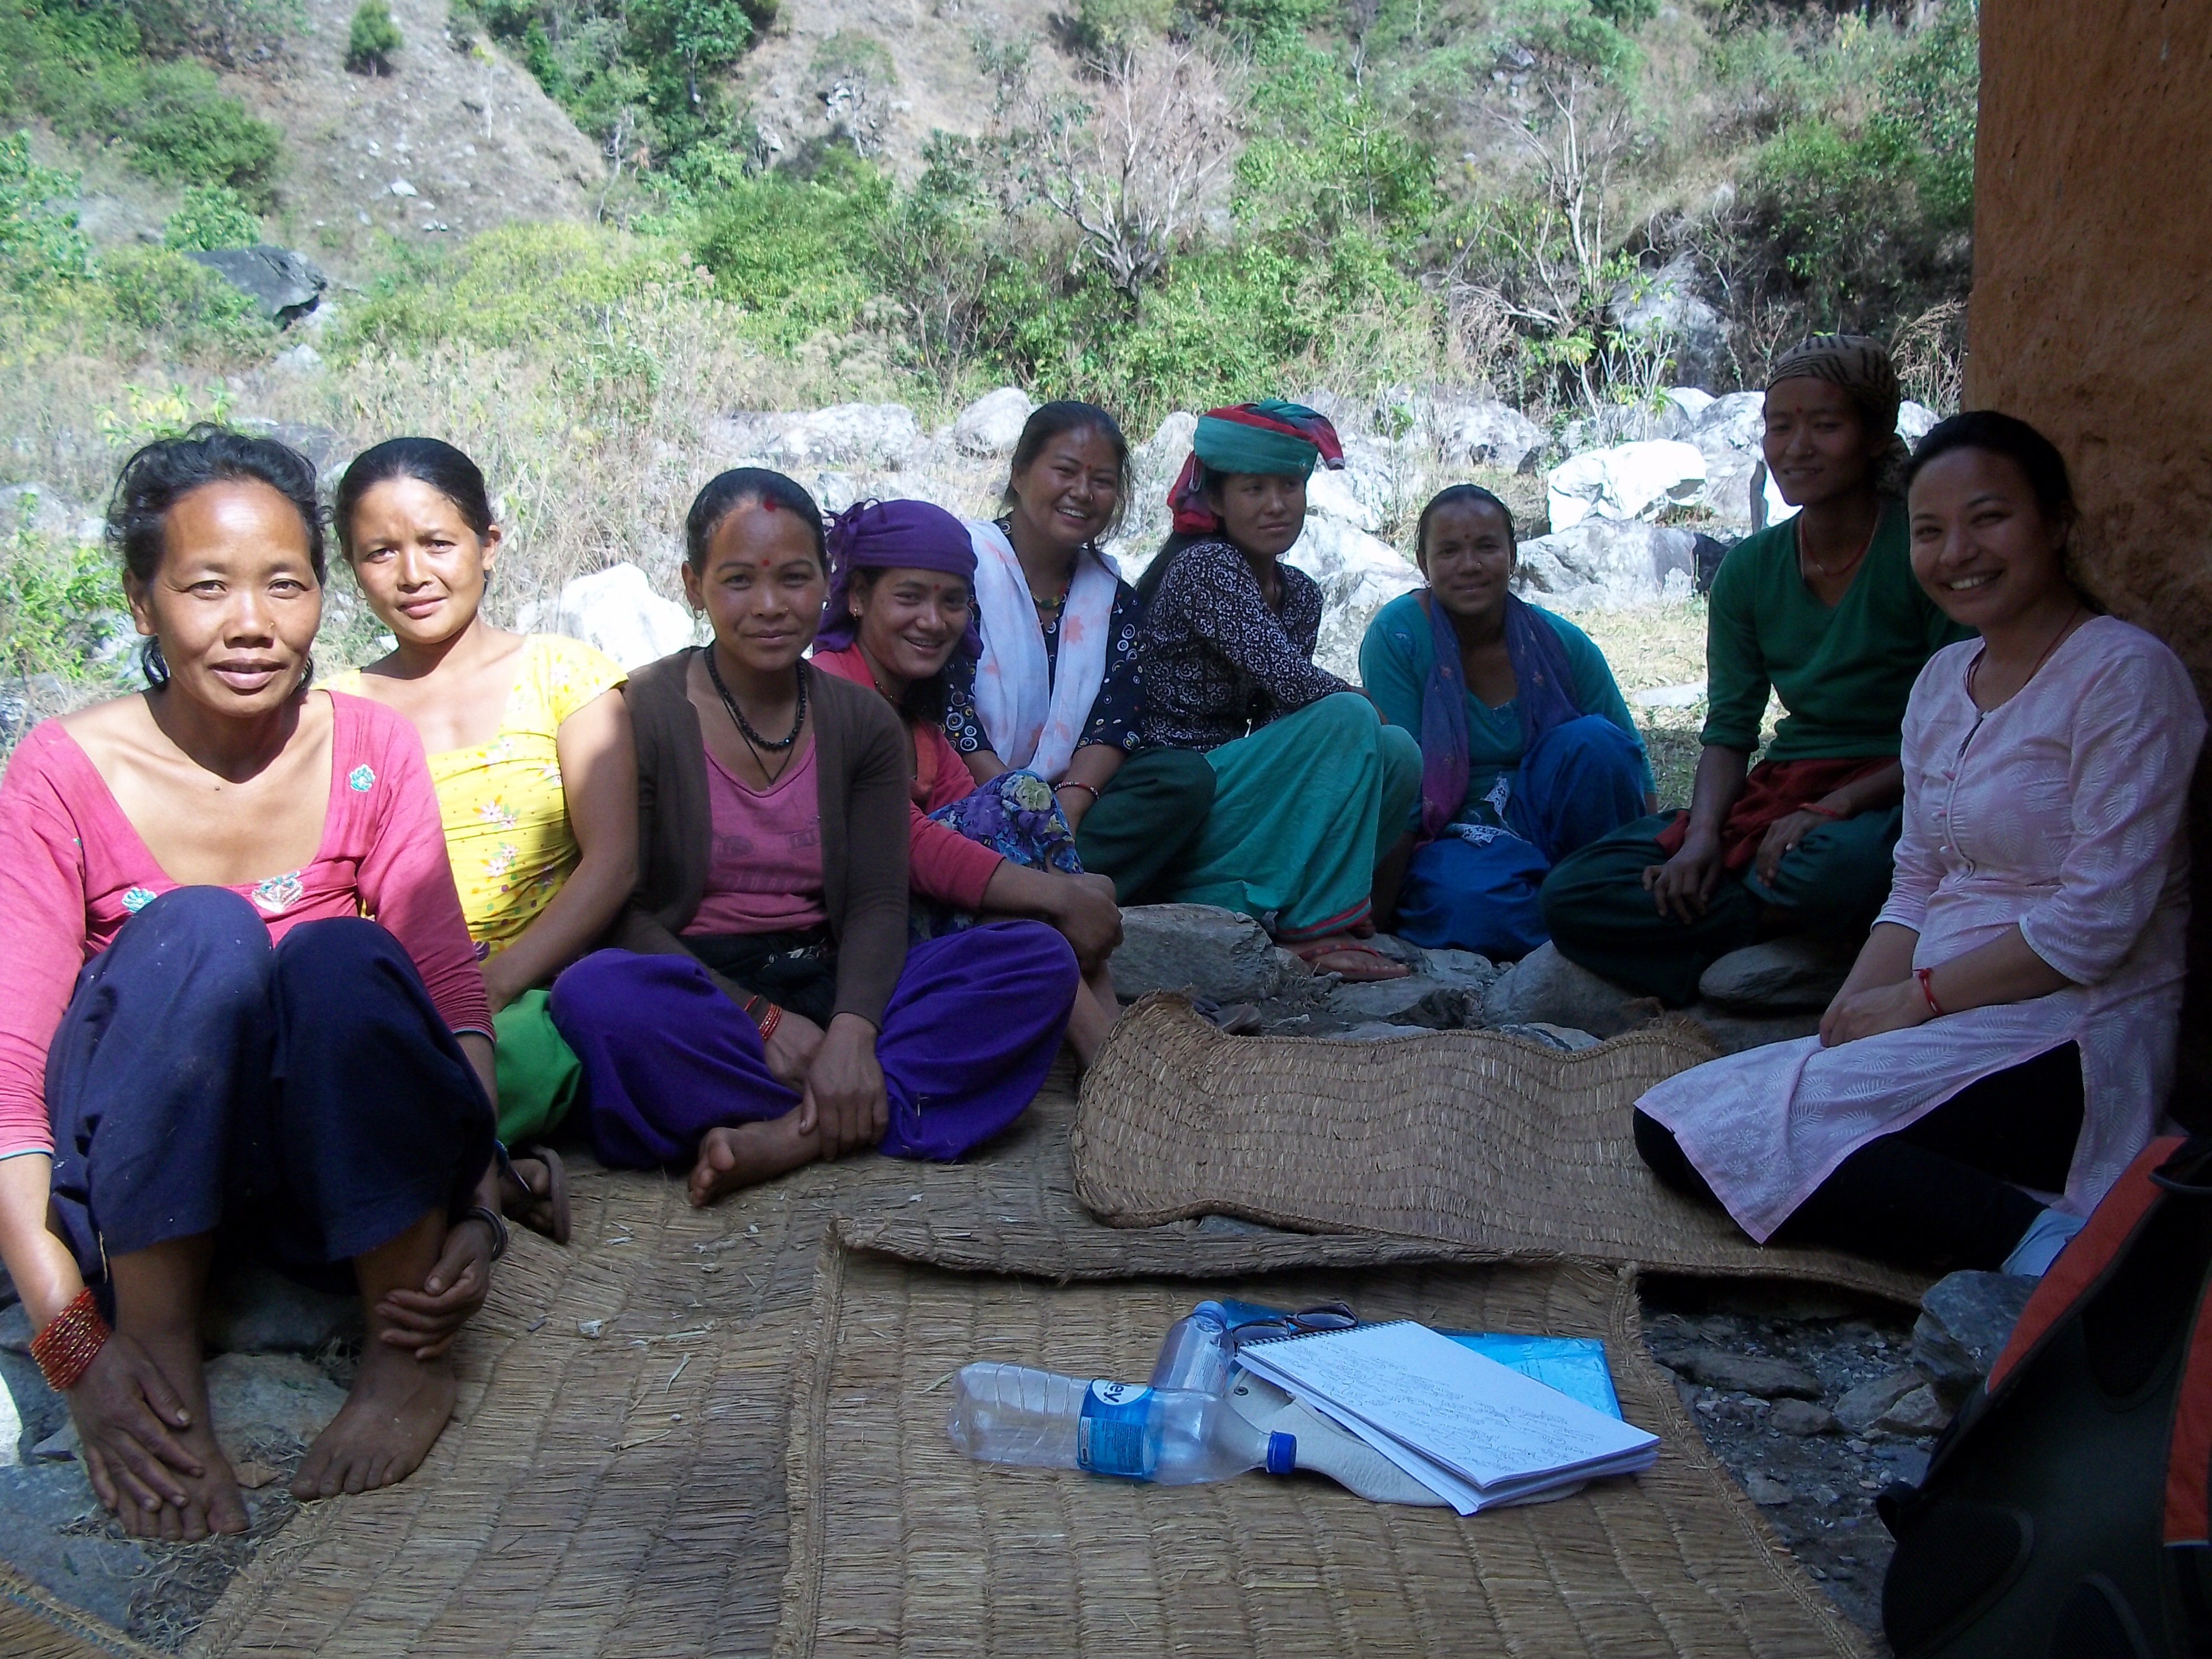 Focus group discussion with women during the evaluation, Surkhet, Nepal, 2018 Anne